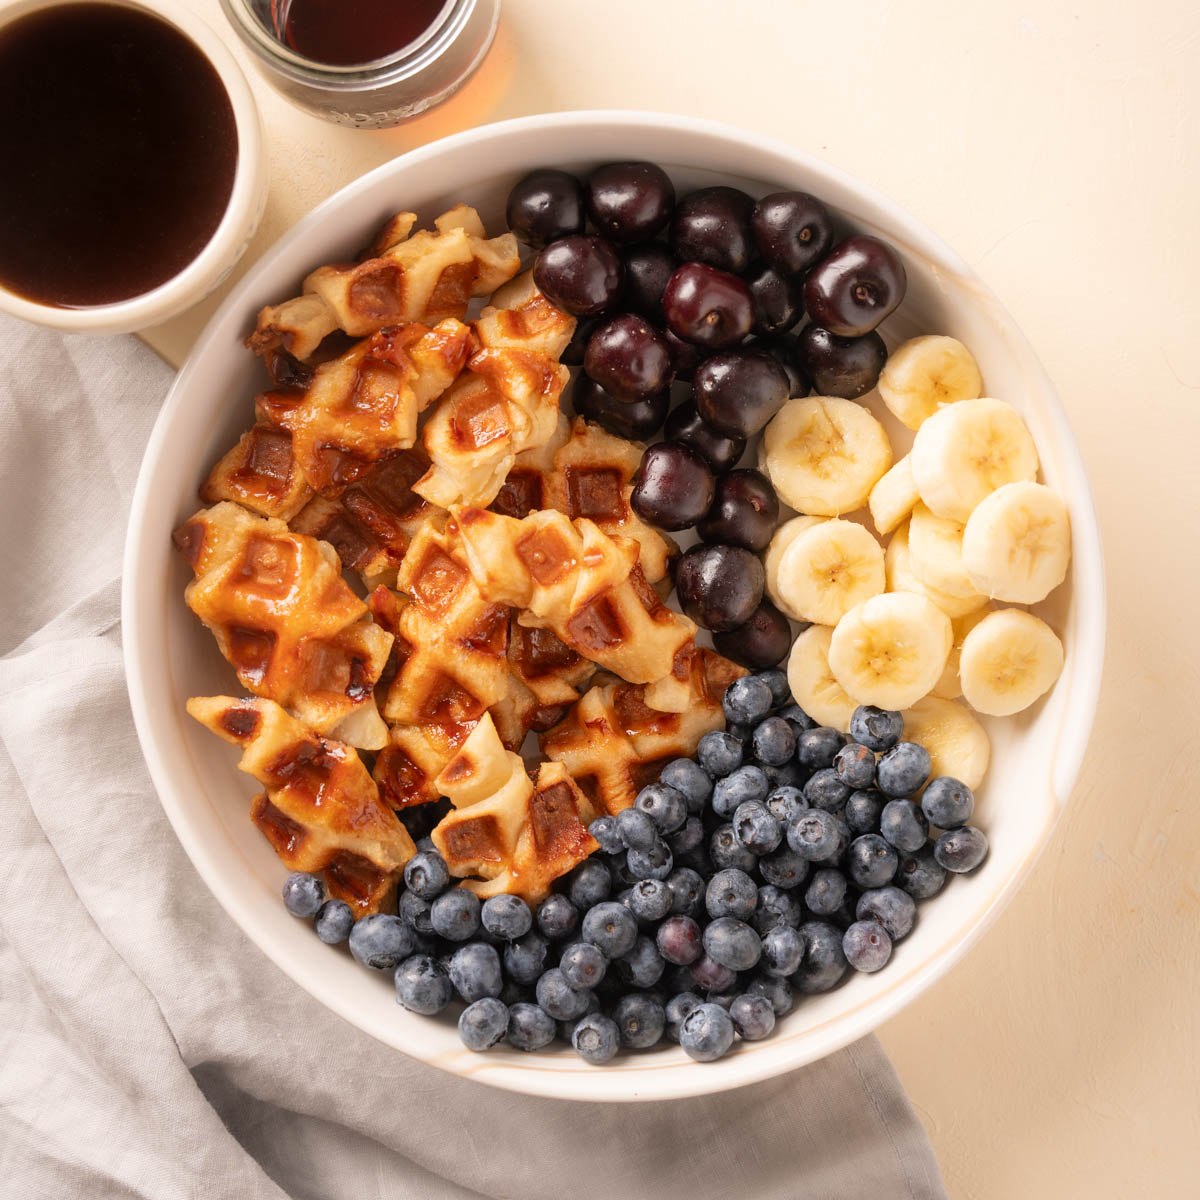 Large bowl of croffles (croissant waffles) with blueberryies, cherries, and sliced banana. On the side there is coffee and syrup. 